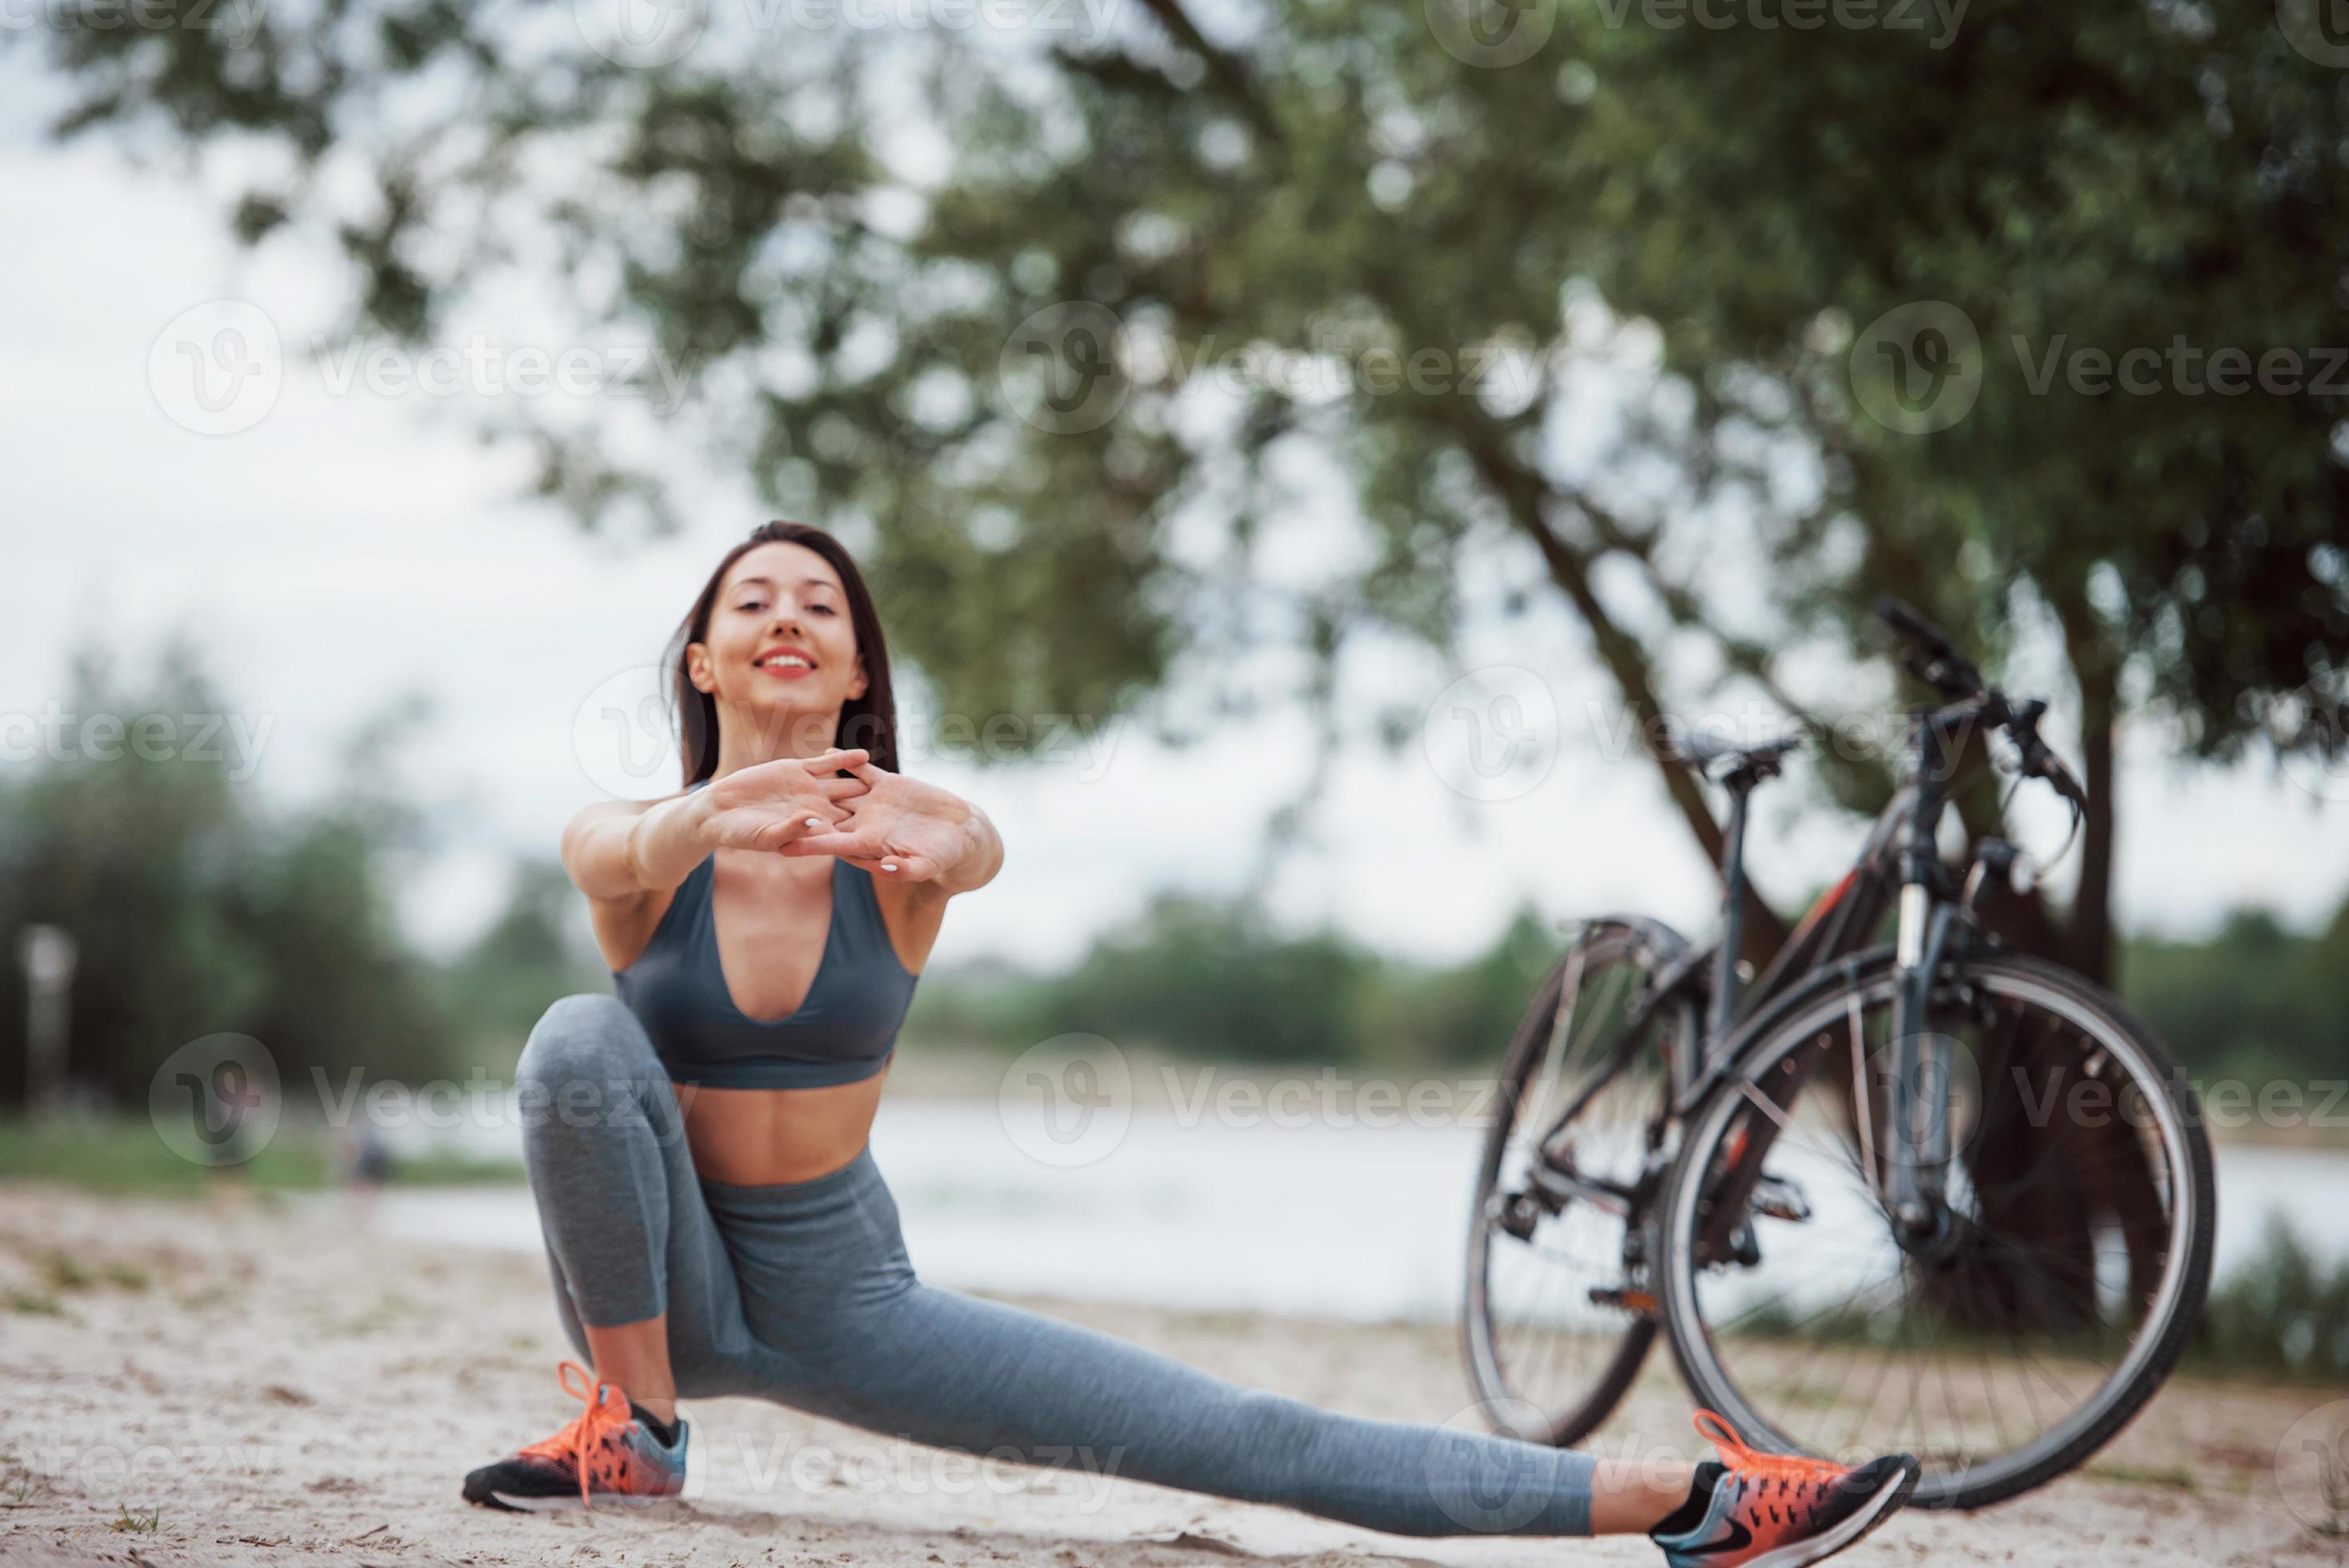 This exercise will make you more flexible. Female cyclist with good body  shape doing yoga and stretching near her bike on beach at daytime 8458846  Stock Photo at Vecteezy